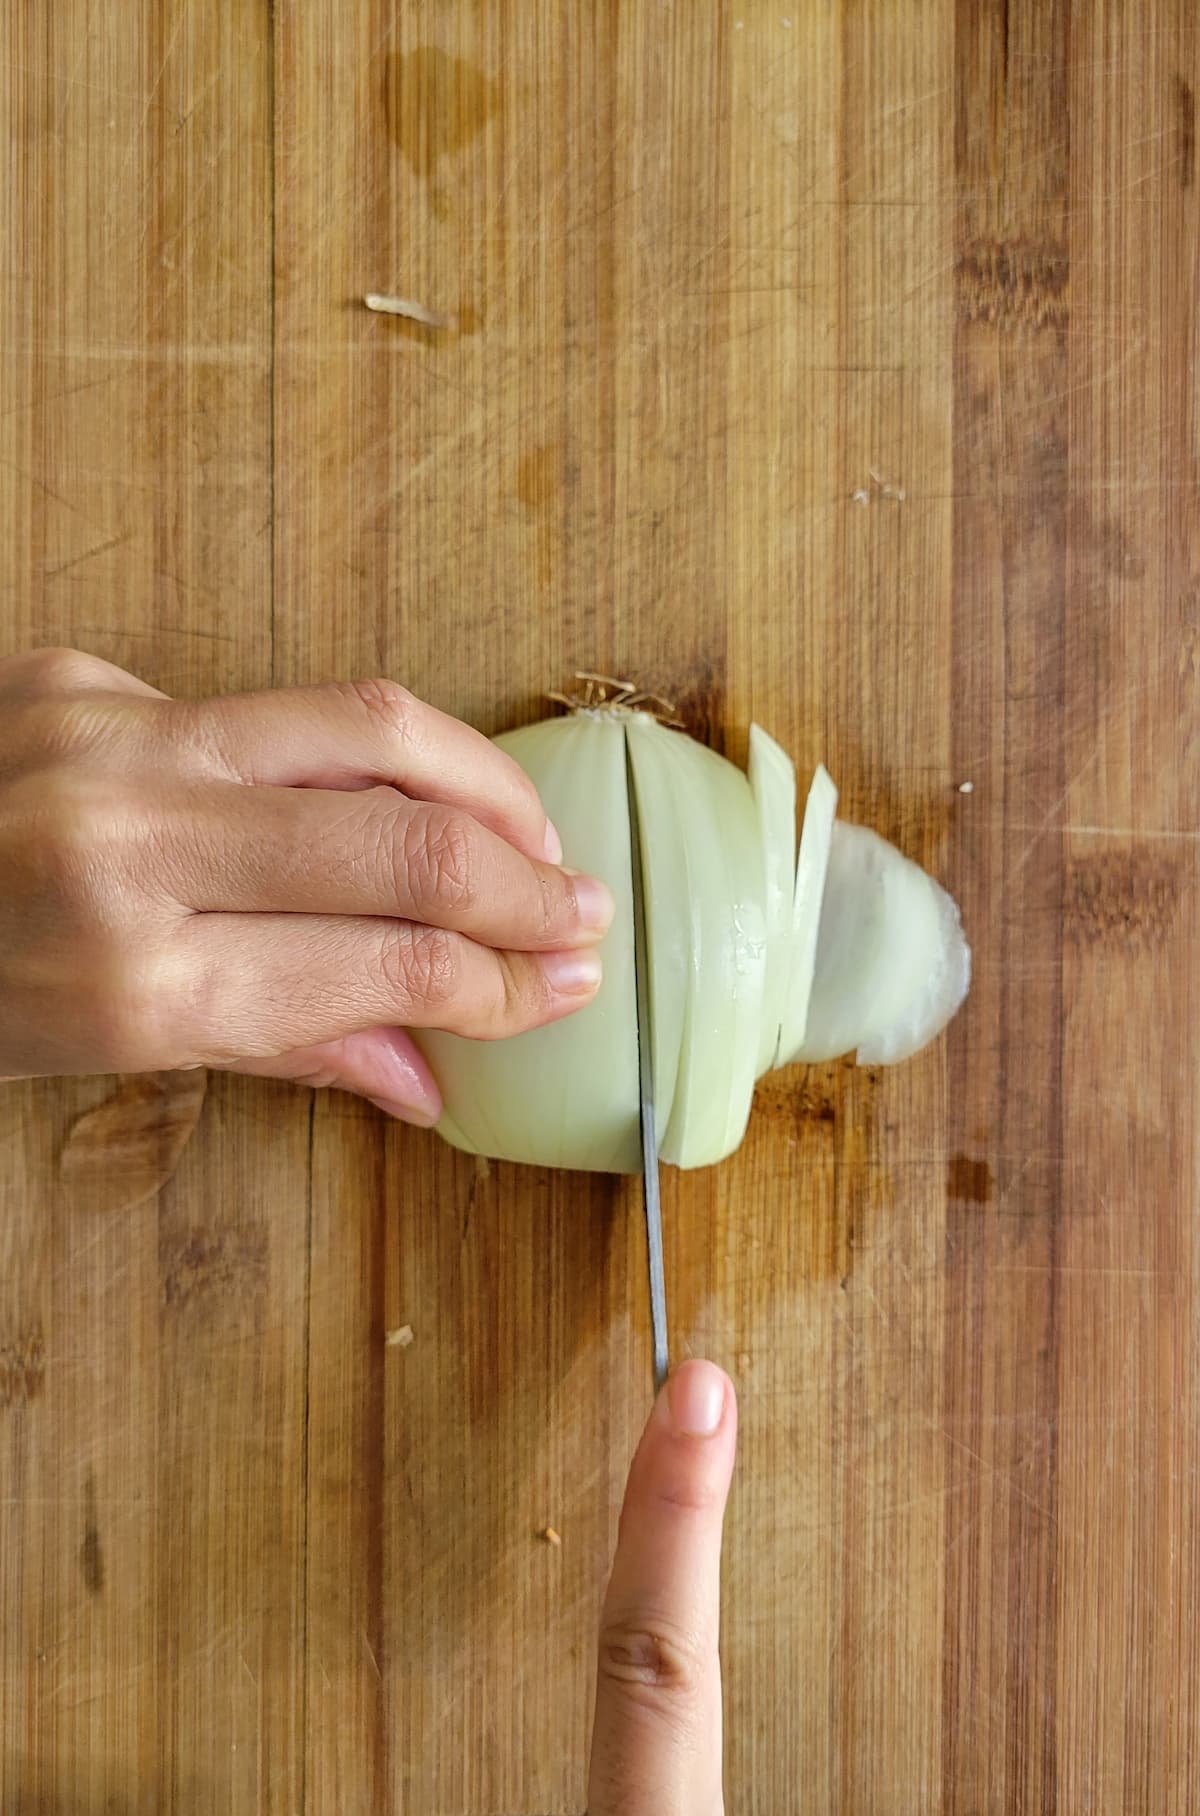 hand with a knife slicing a white onion on a cutting board